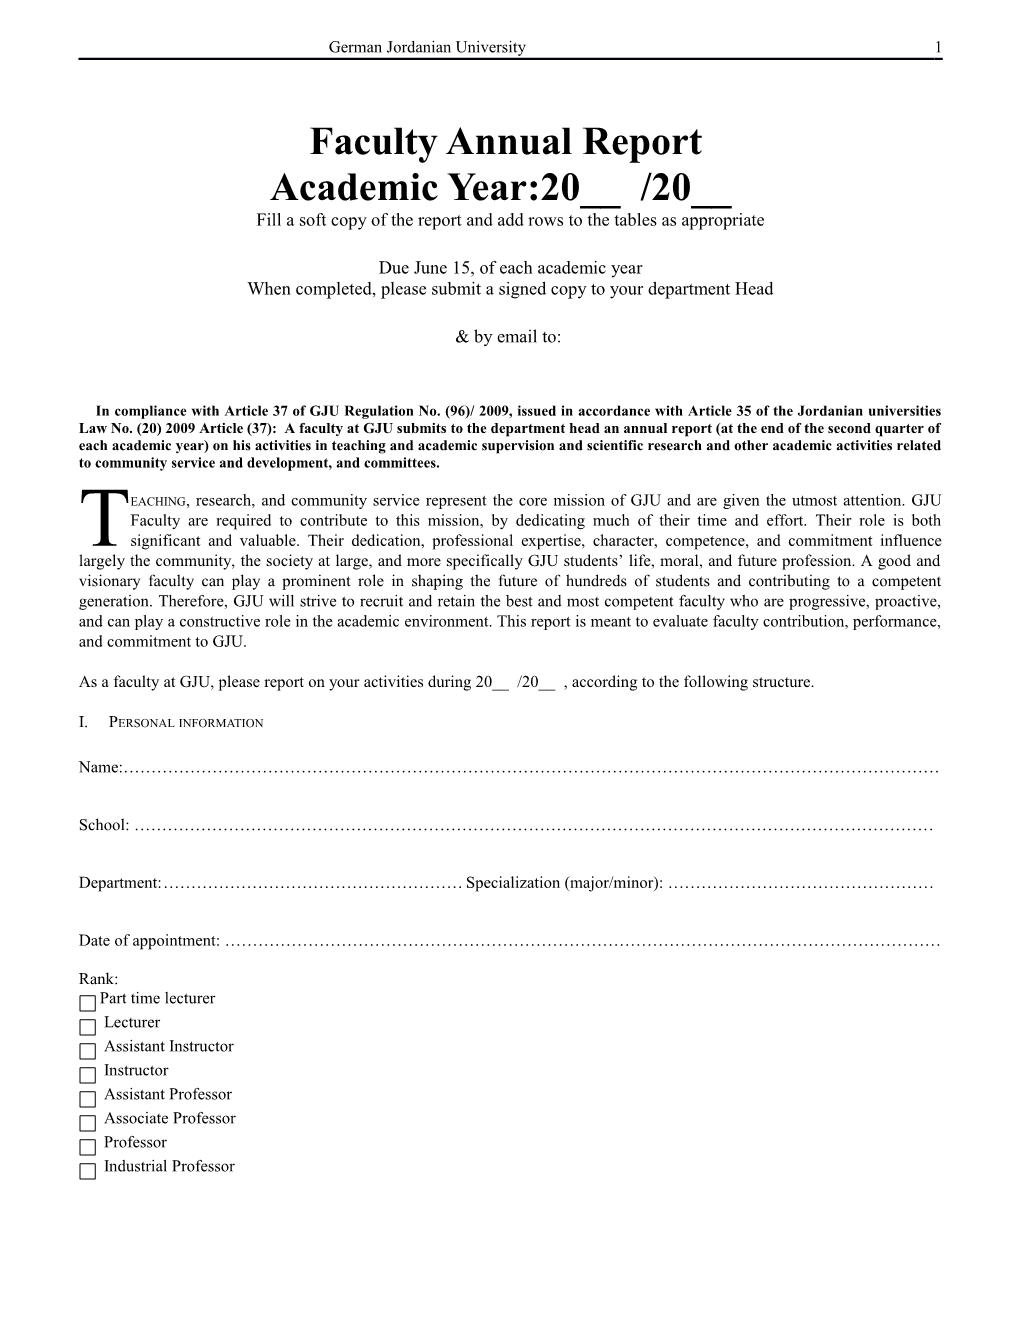 2012-13 Annual Faculty Report